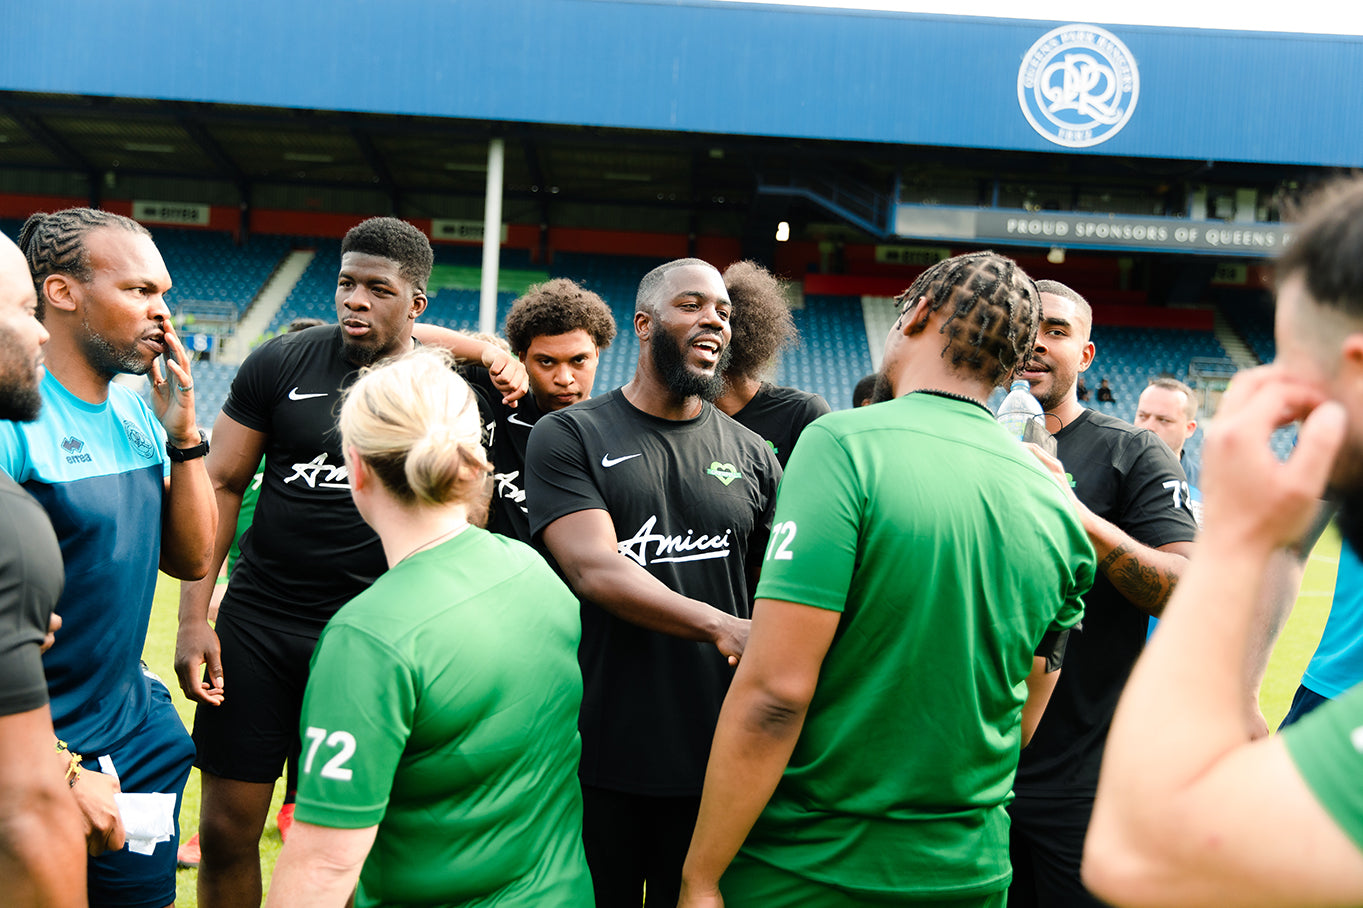 The Grenfell Memorial Cup Brought a Neglected Community Together Through the Beautiful Game